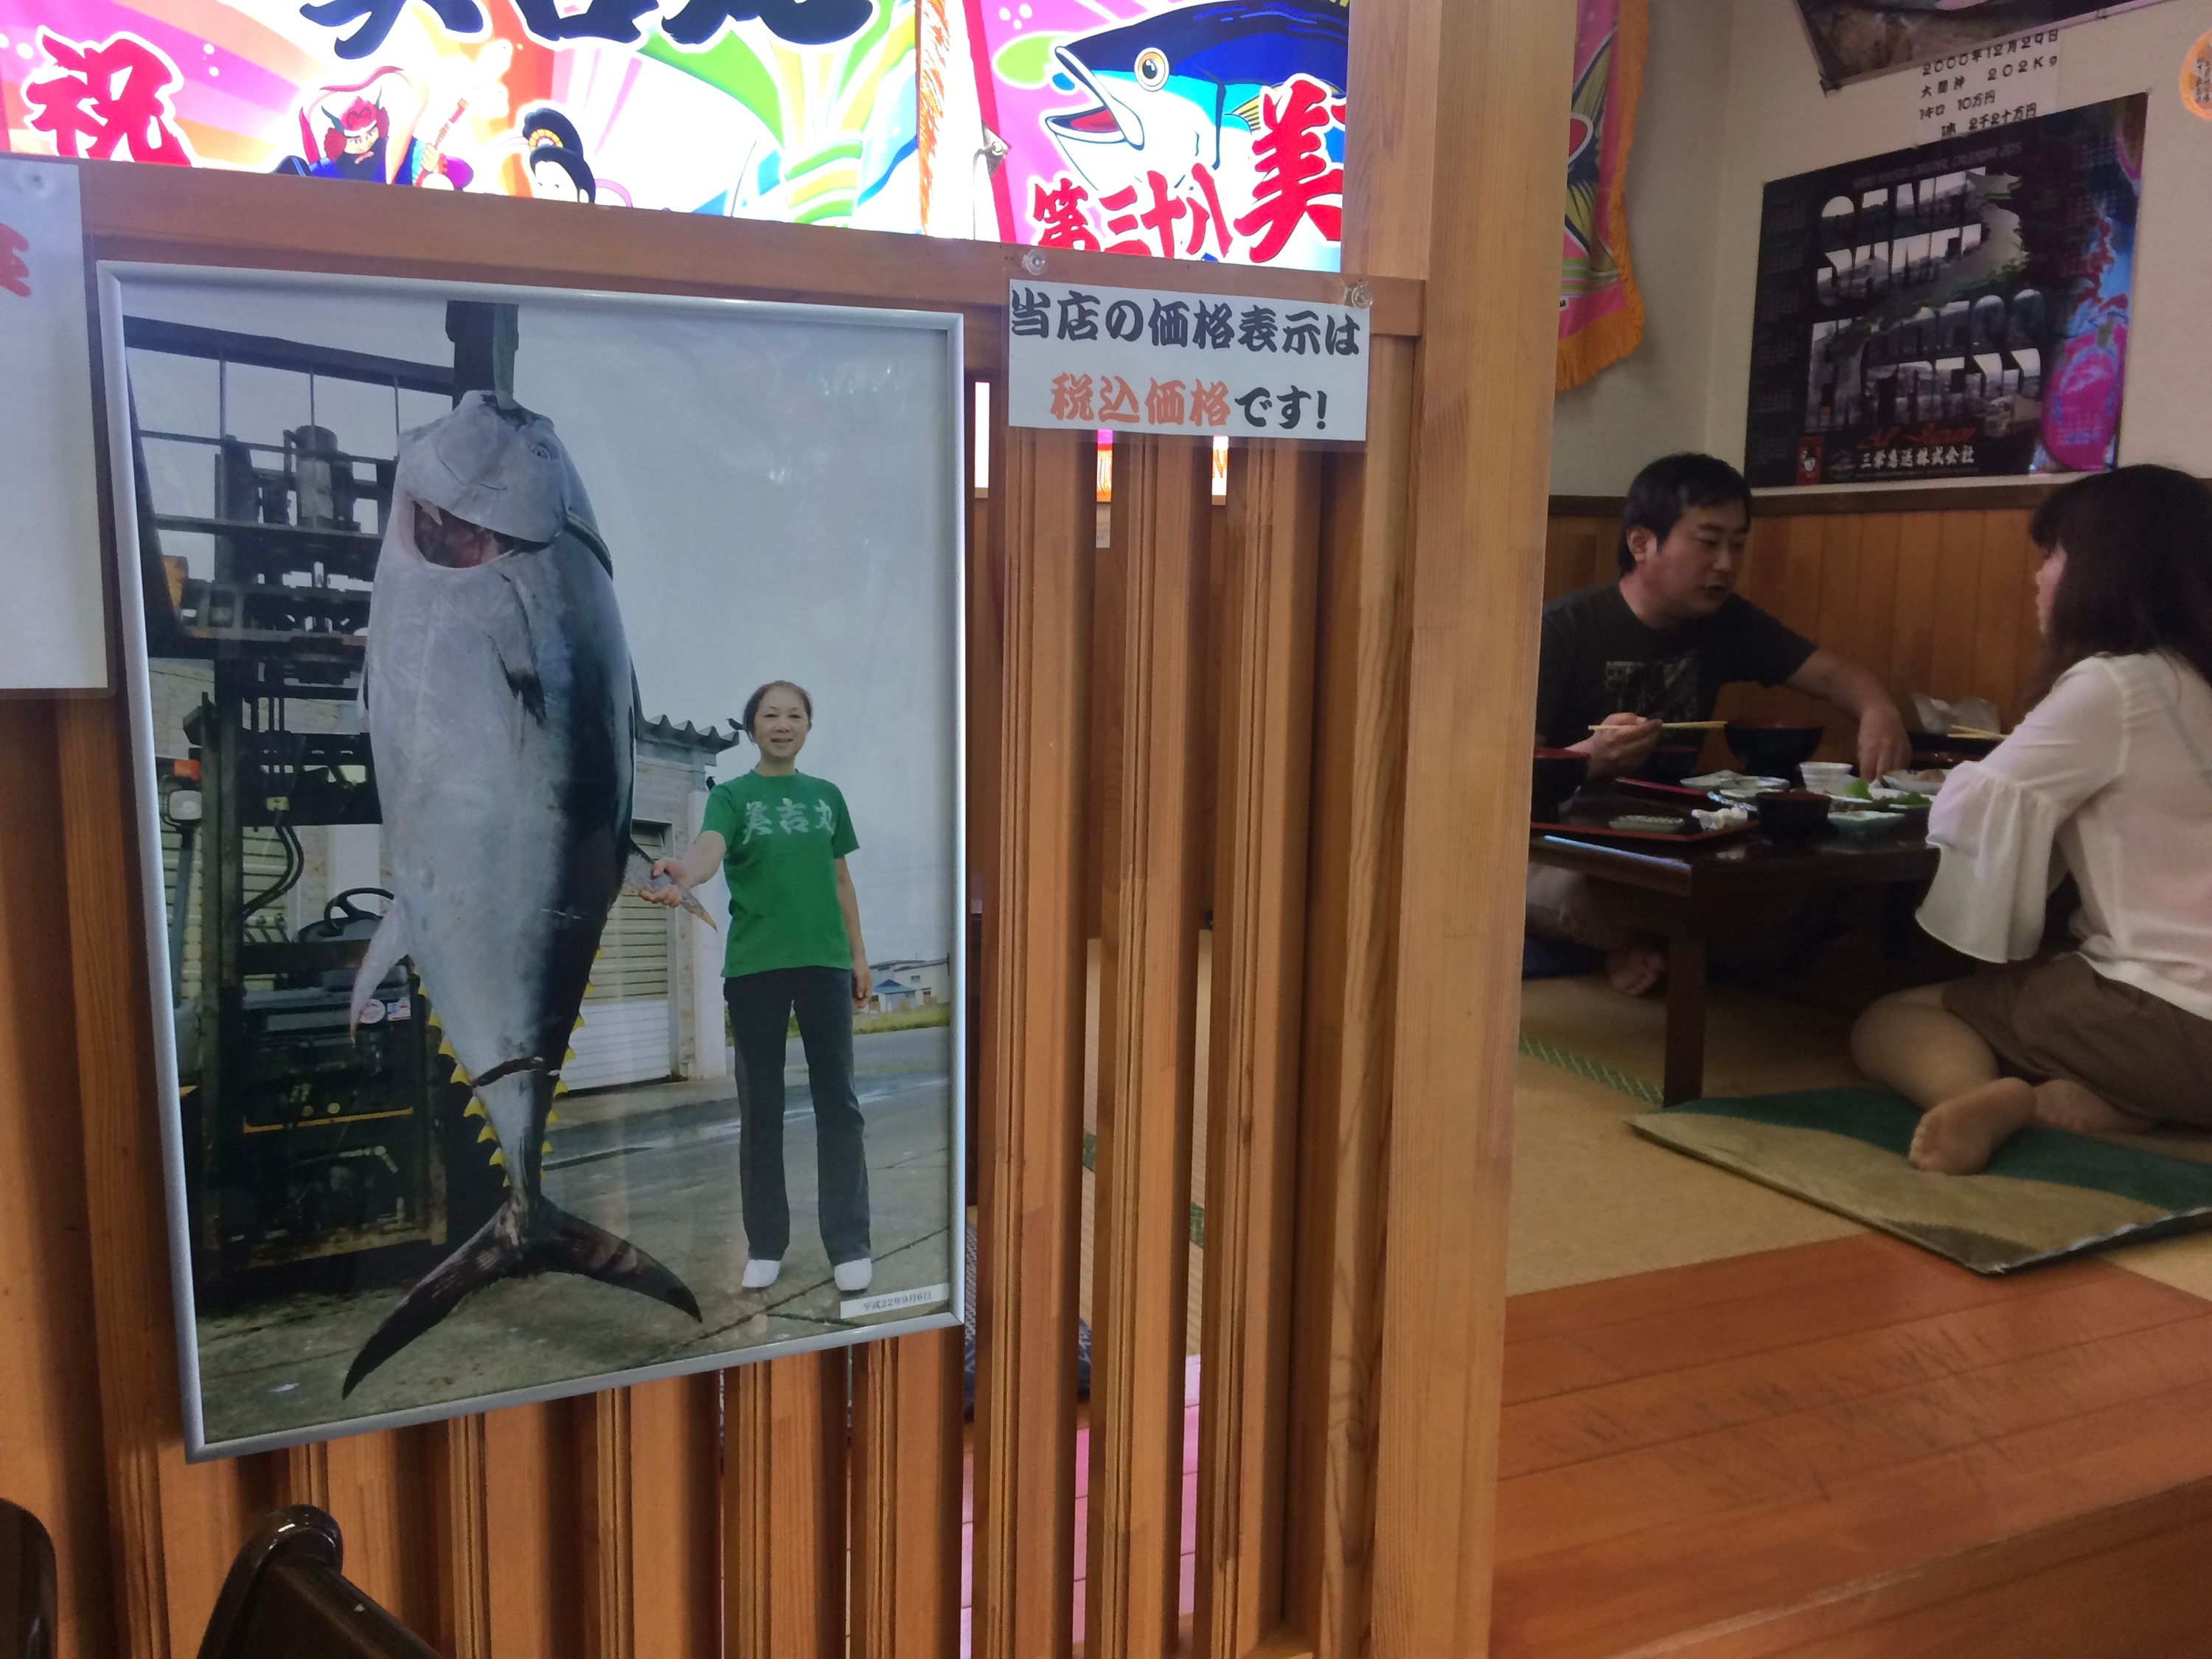 View of a seafood restaurant with two customers at a table, and a picture of a woman posing with a bluefin tuna much larger than she is in the foreground.